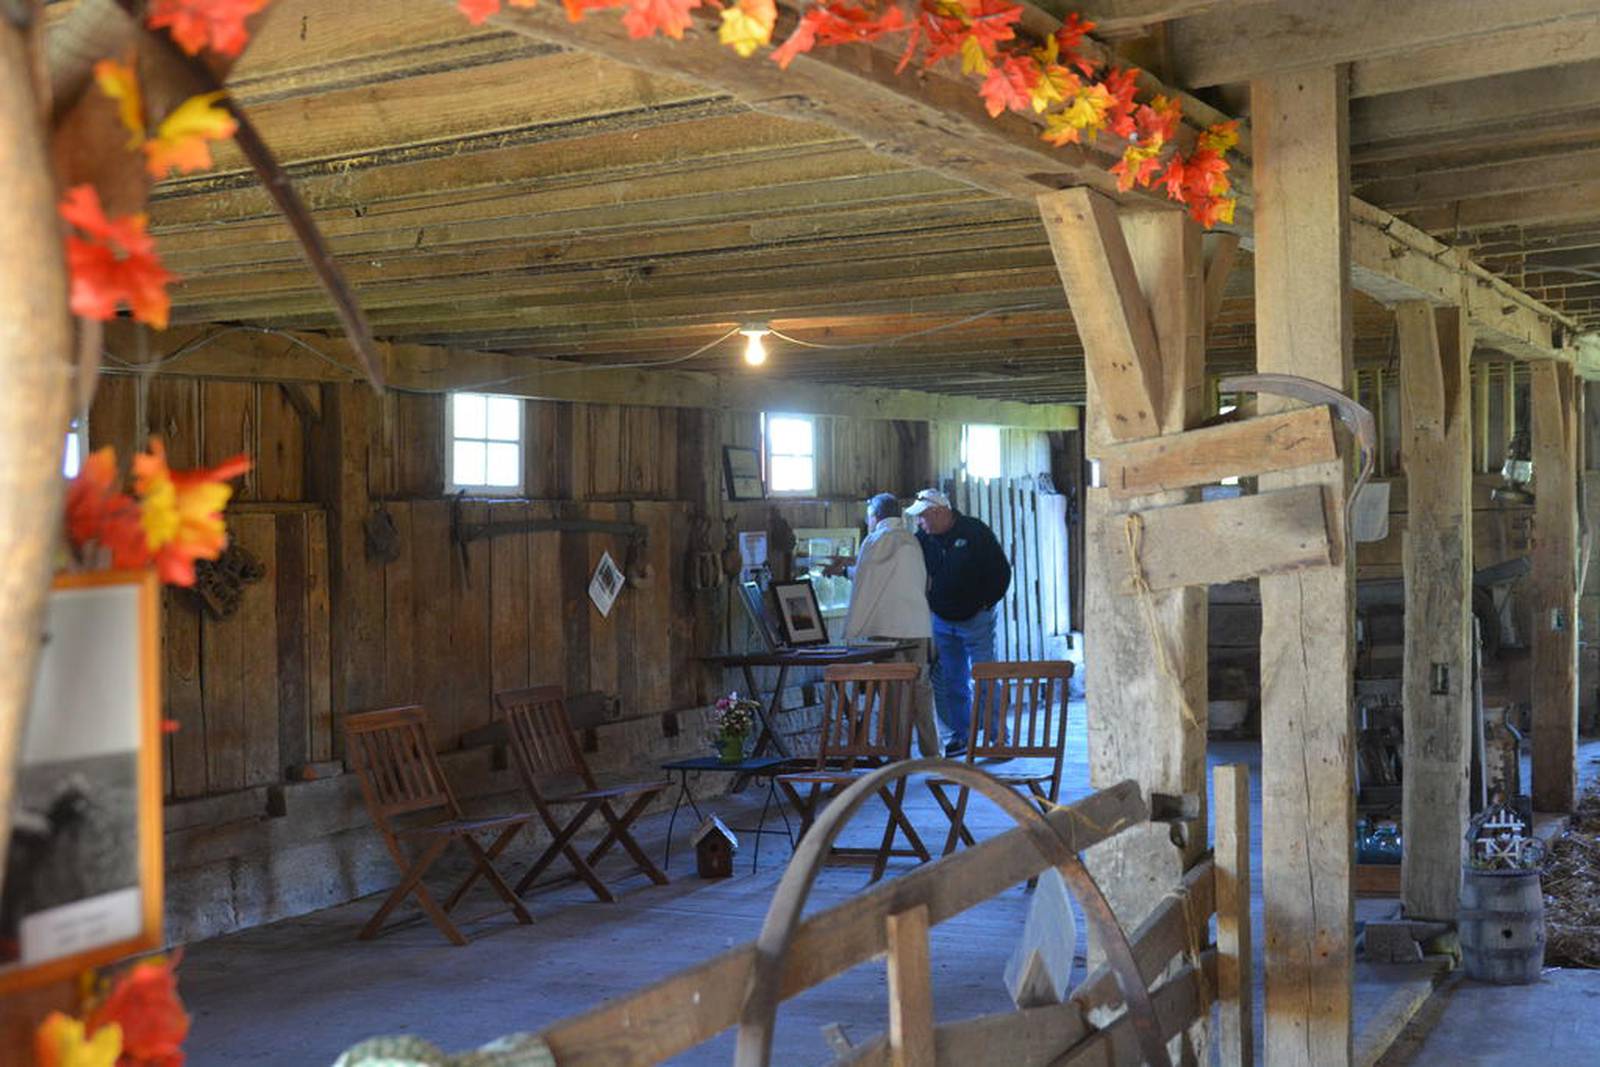 ‘Barnstorming’ Mingo farm featured in statewide Iowa Barn Tour